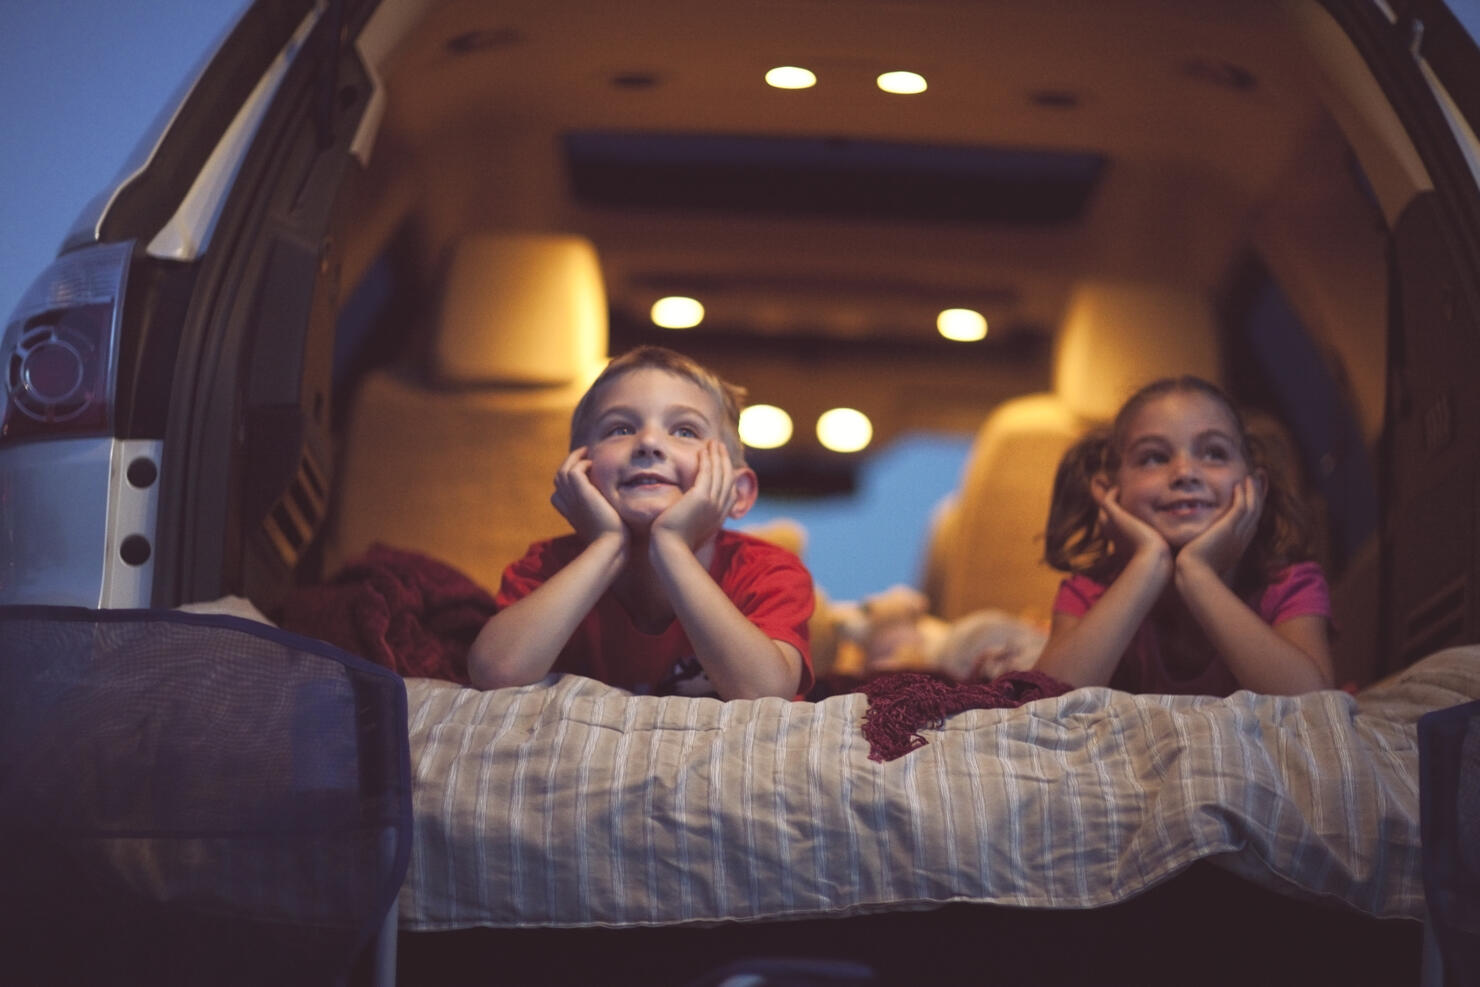 Children at a Drive-in Movie